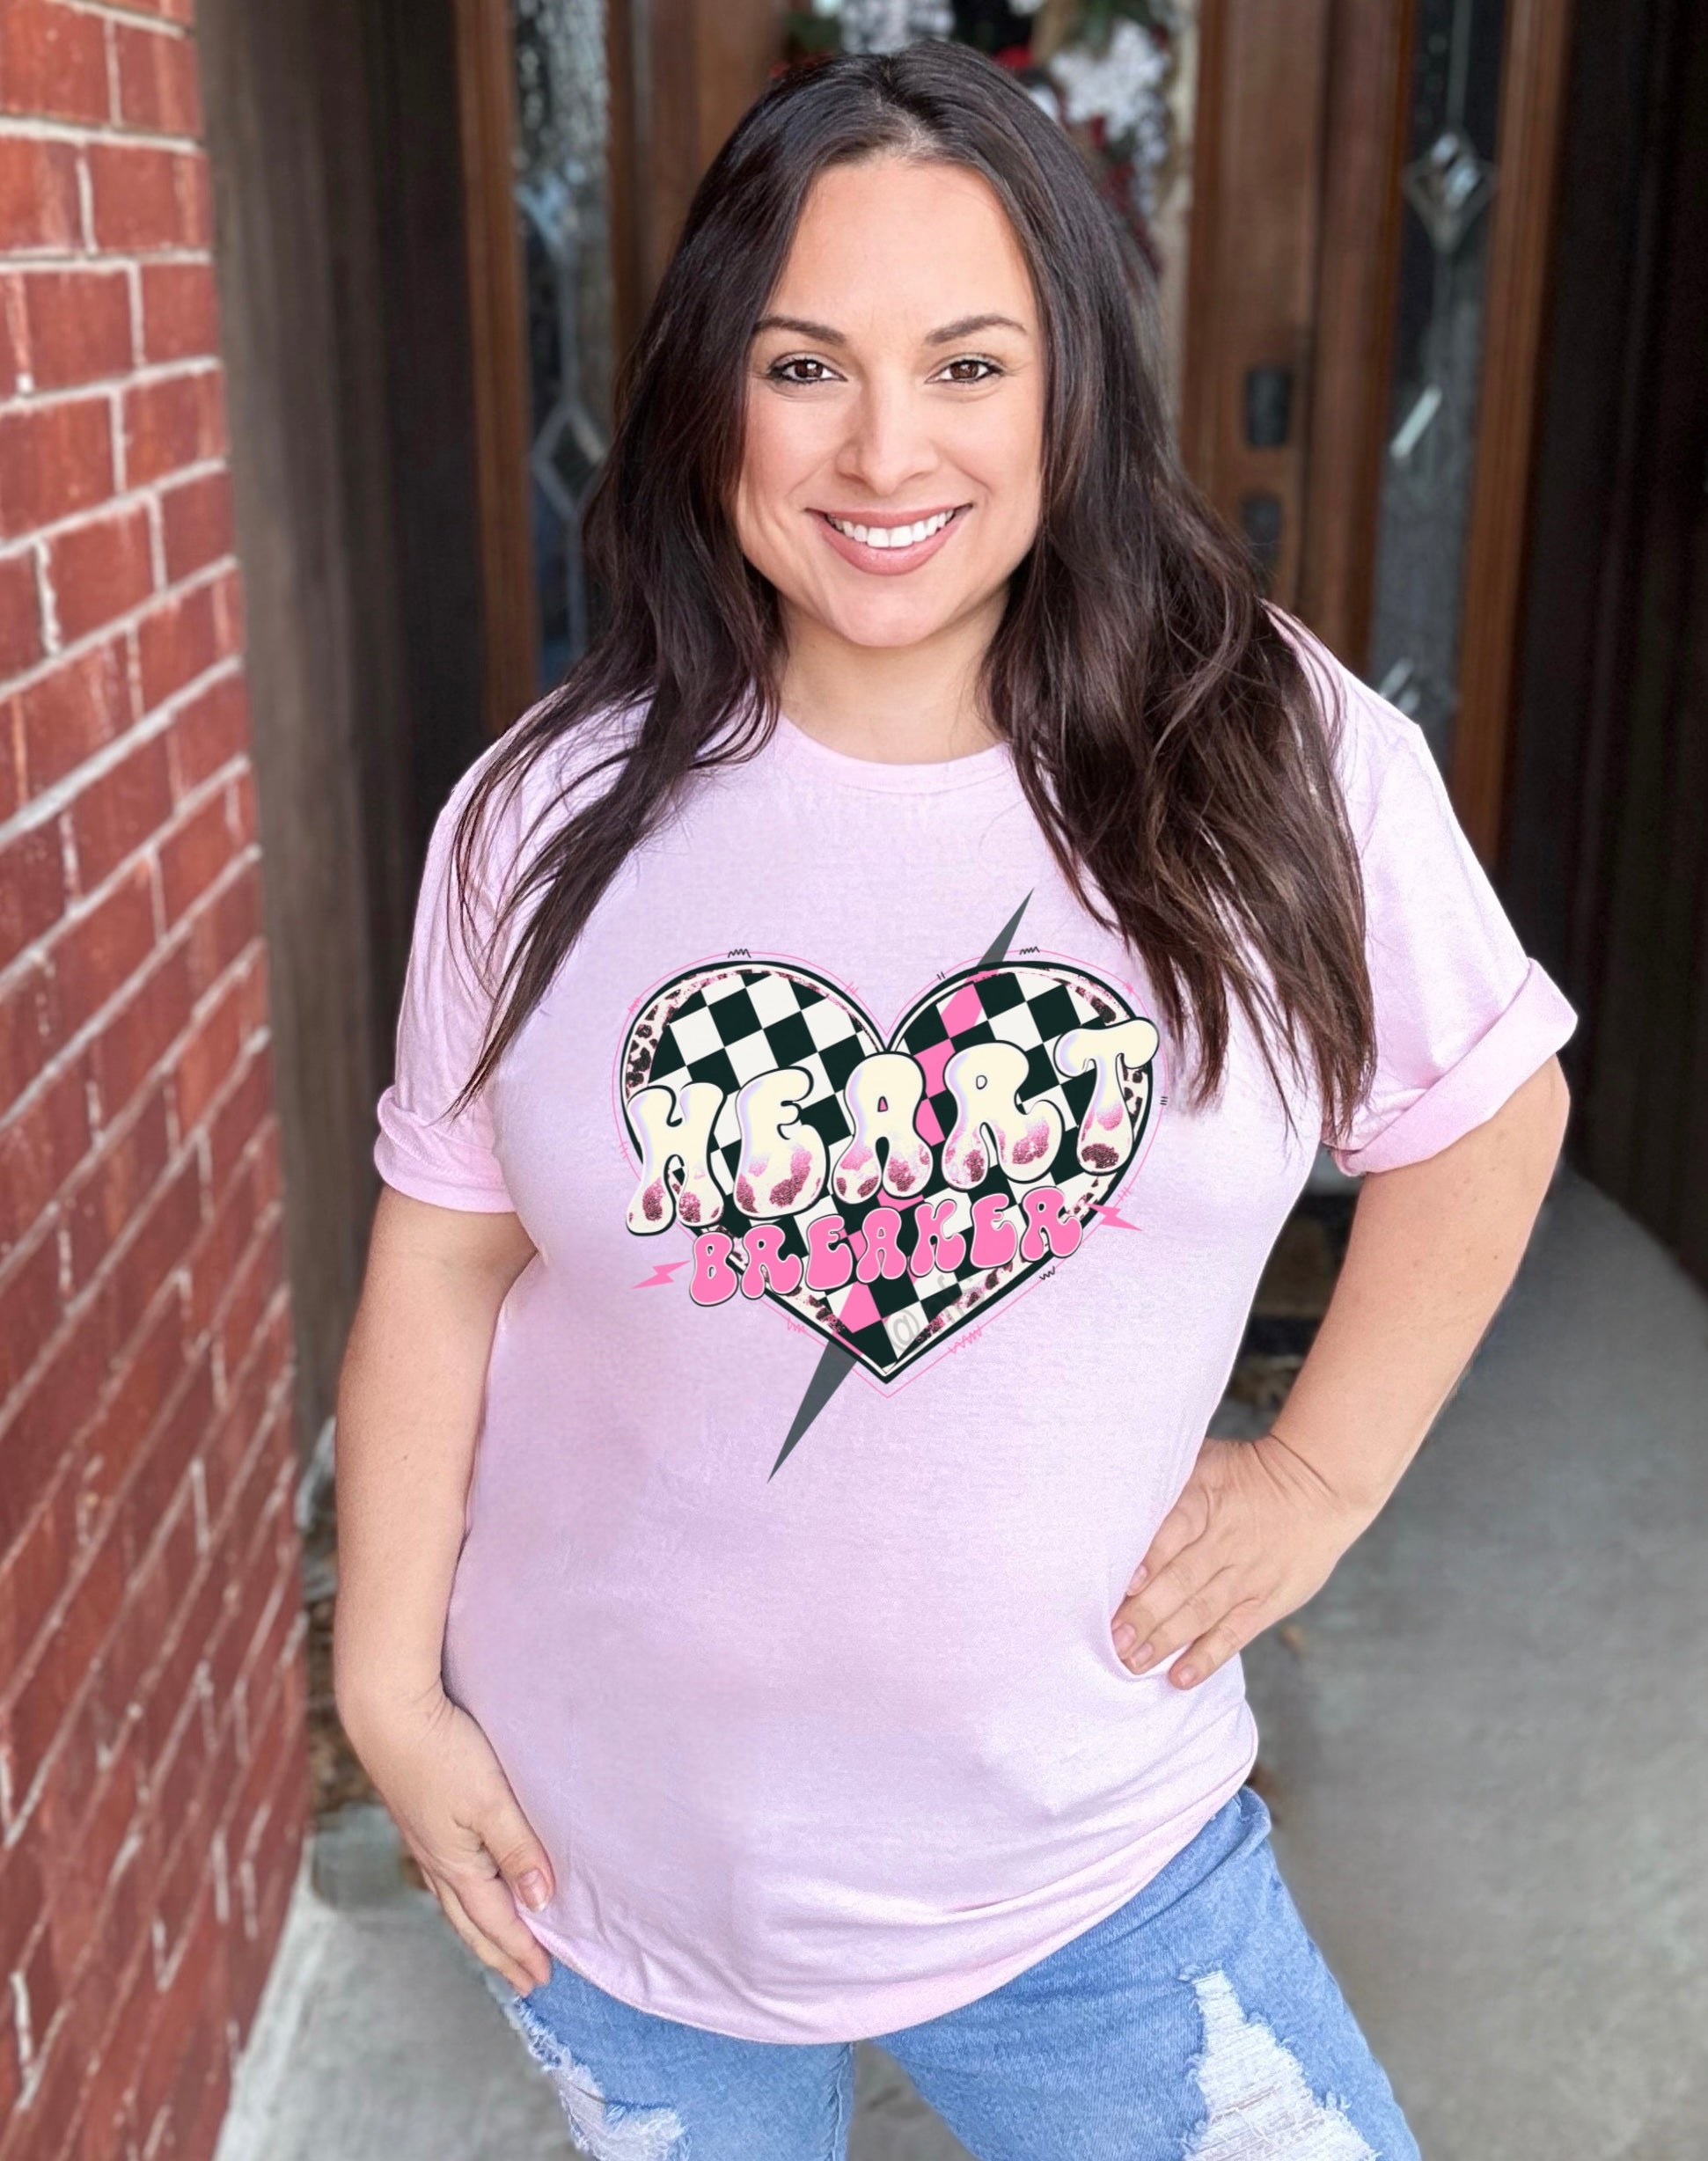 Get ready to break some hearts with our Heartbreaker Pink Graphic Tee! This stylish tee is sure to turn heads with its unique design and playful attitude. Made from high-quality materials, it's both comfortable and stylish. Don't be afraid to show off your playful and quirky side with this fun and flirty tee.

Unisex Fit , Available in Small to 4X